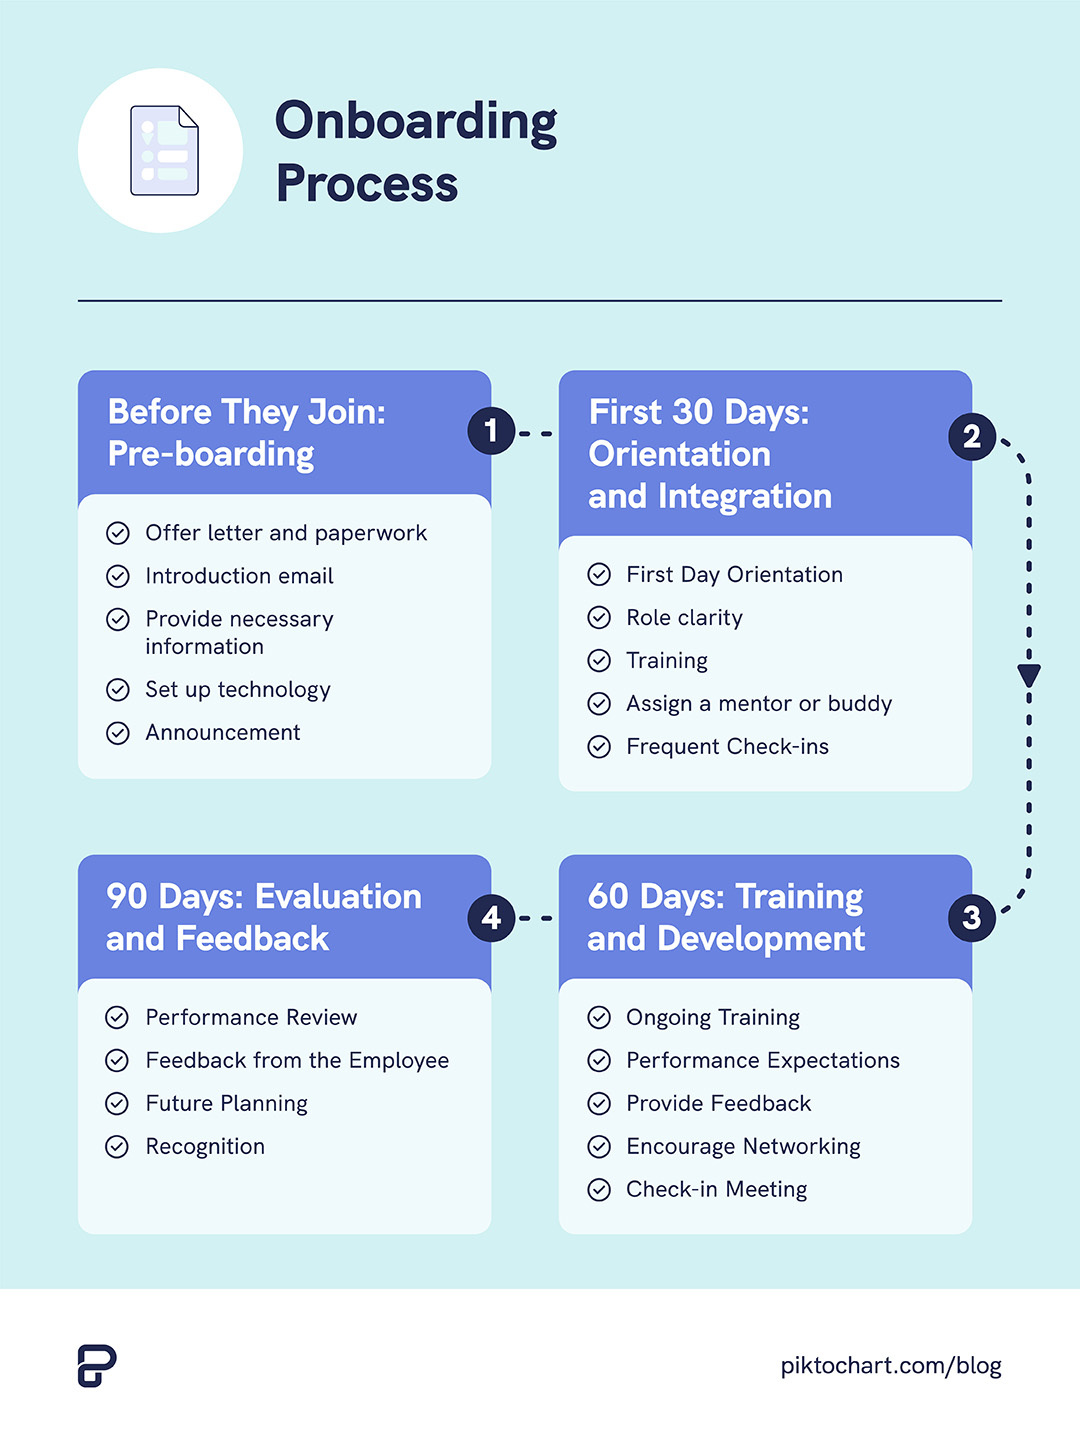 image showing the timeline of onboarding process